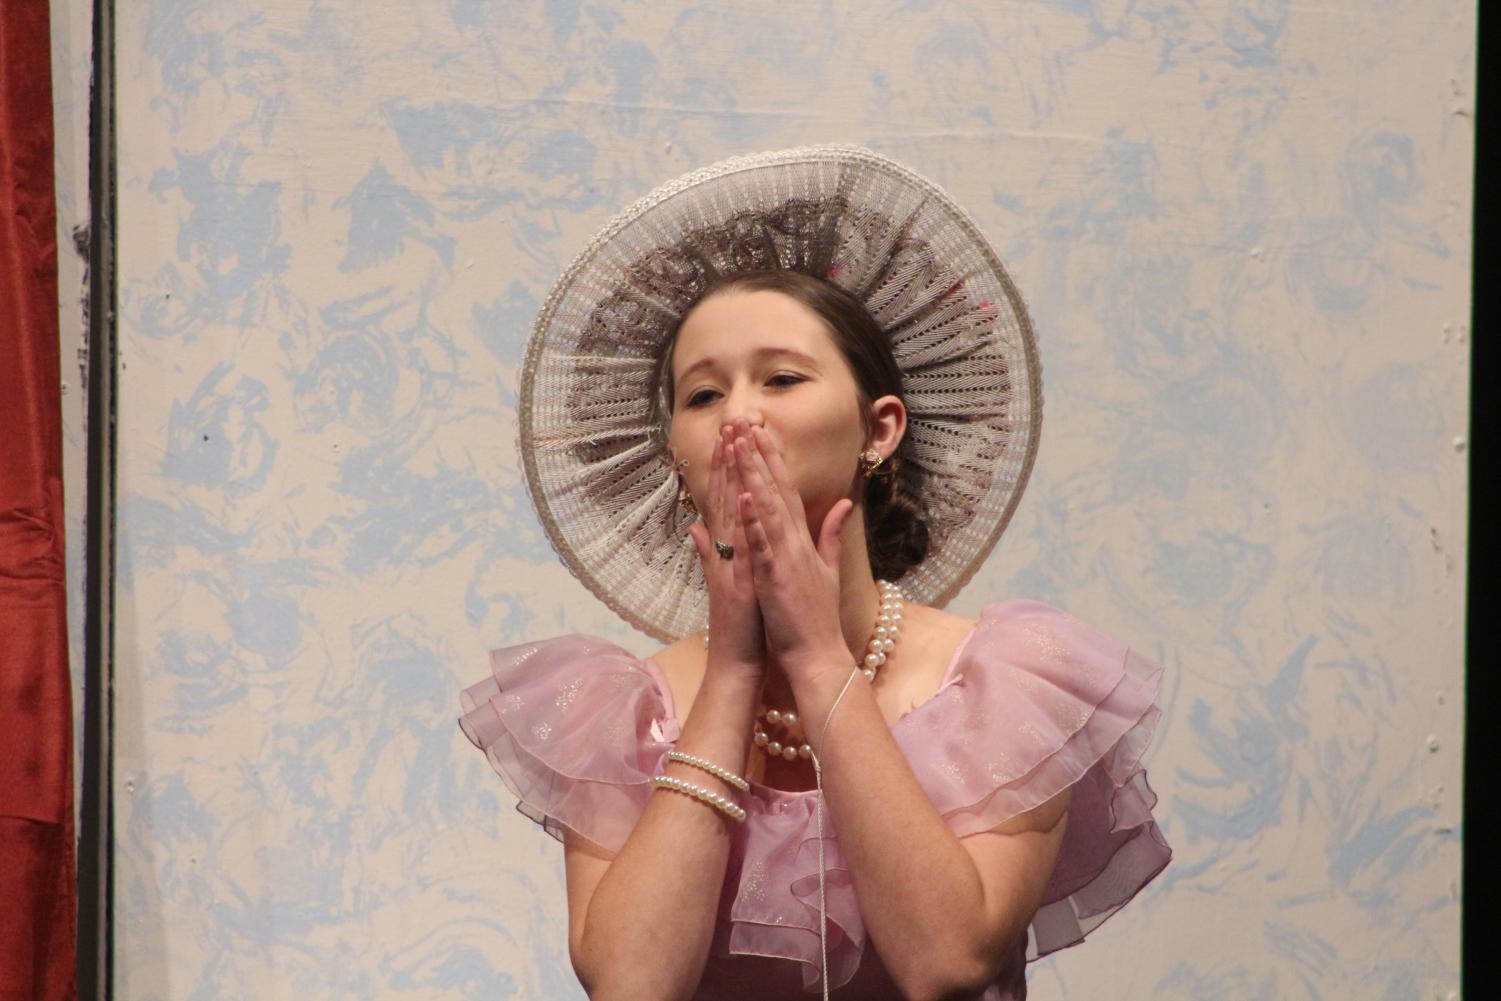 The+Importance+of+Being+Earnest+Drama+Performance++%28Photos+by+Mya+Studyvin%29